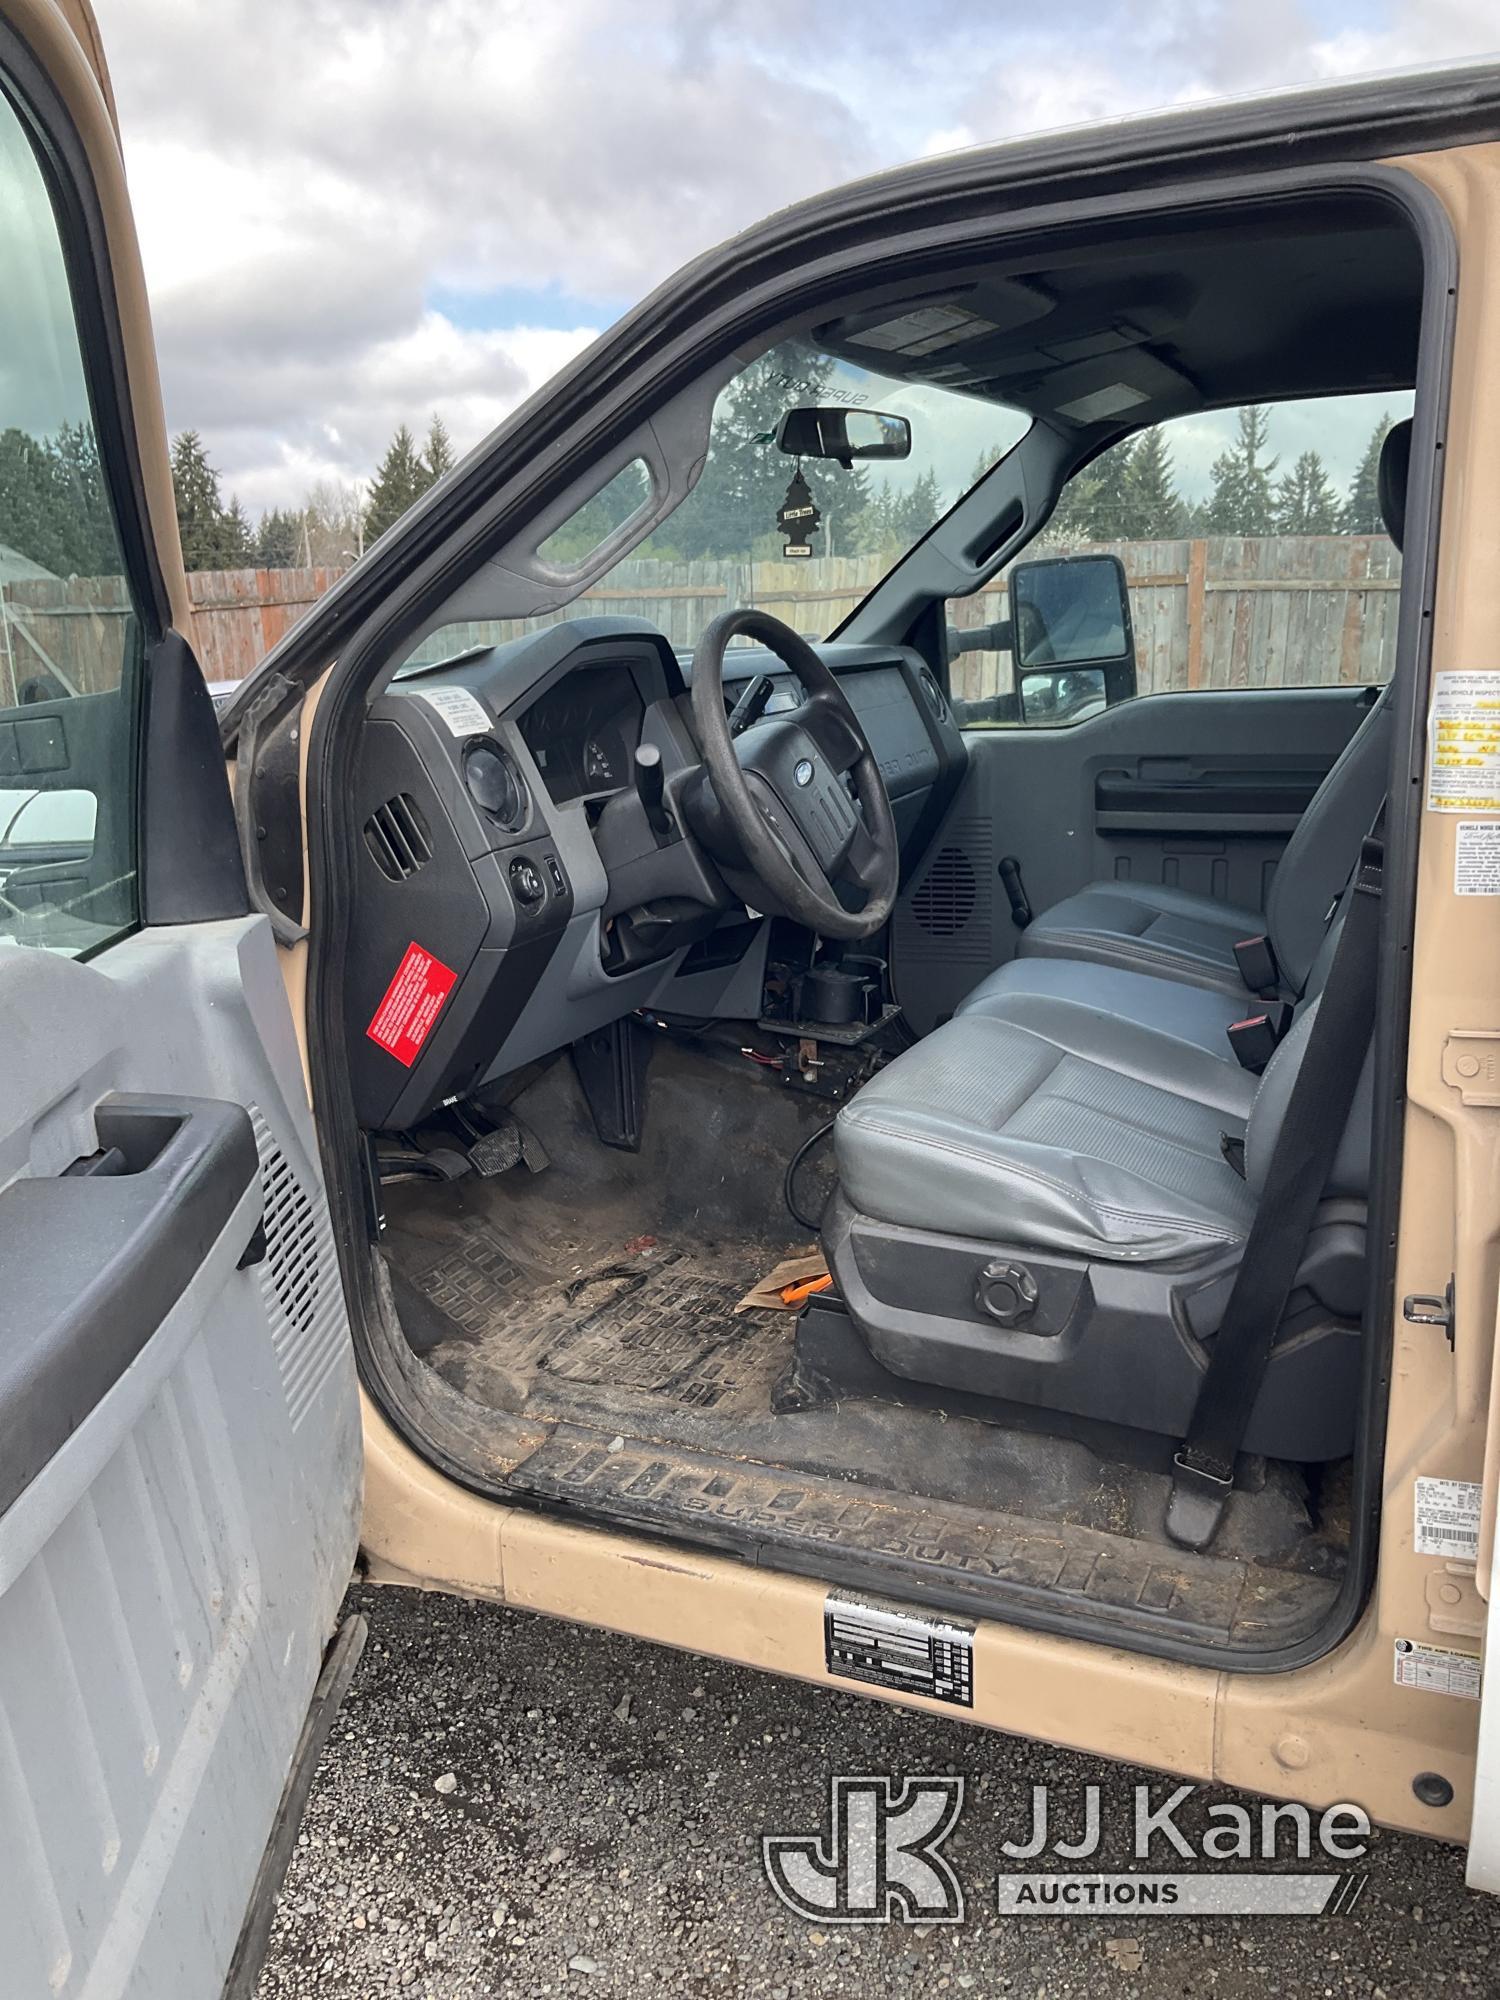 (Tacoma, WA) 2015 Ford F350 Crew-Cab Pickup Truck Not Running, Condition Unknown) (Truck Will Not St